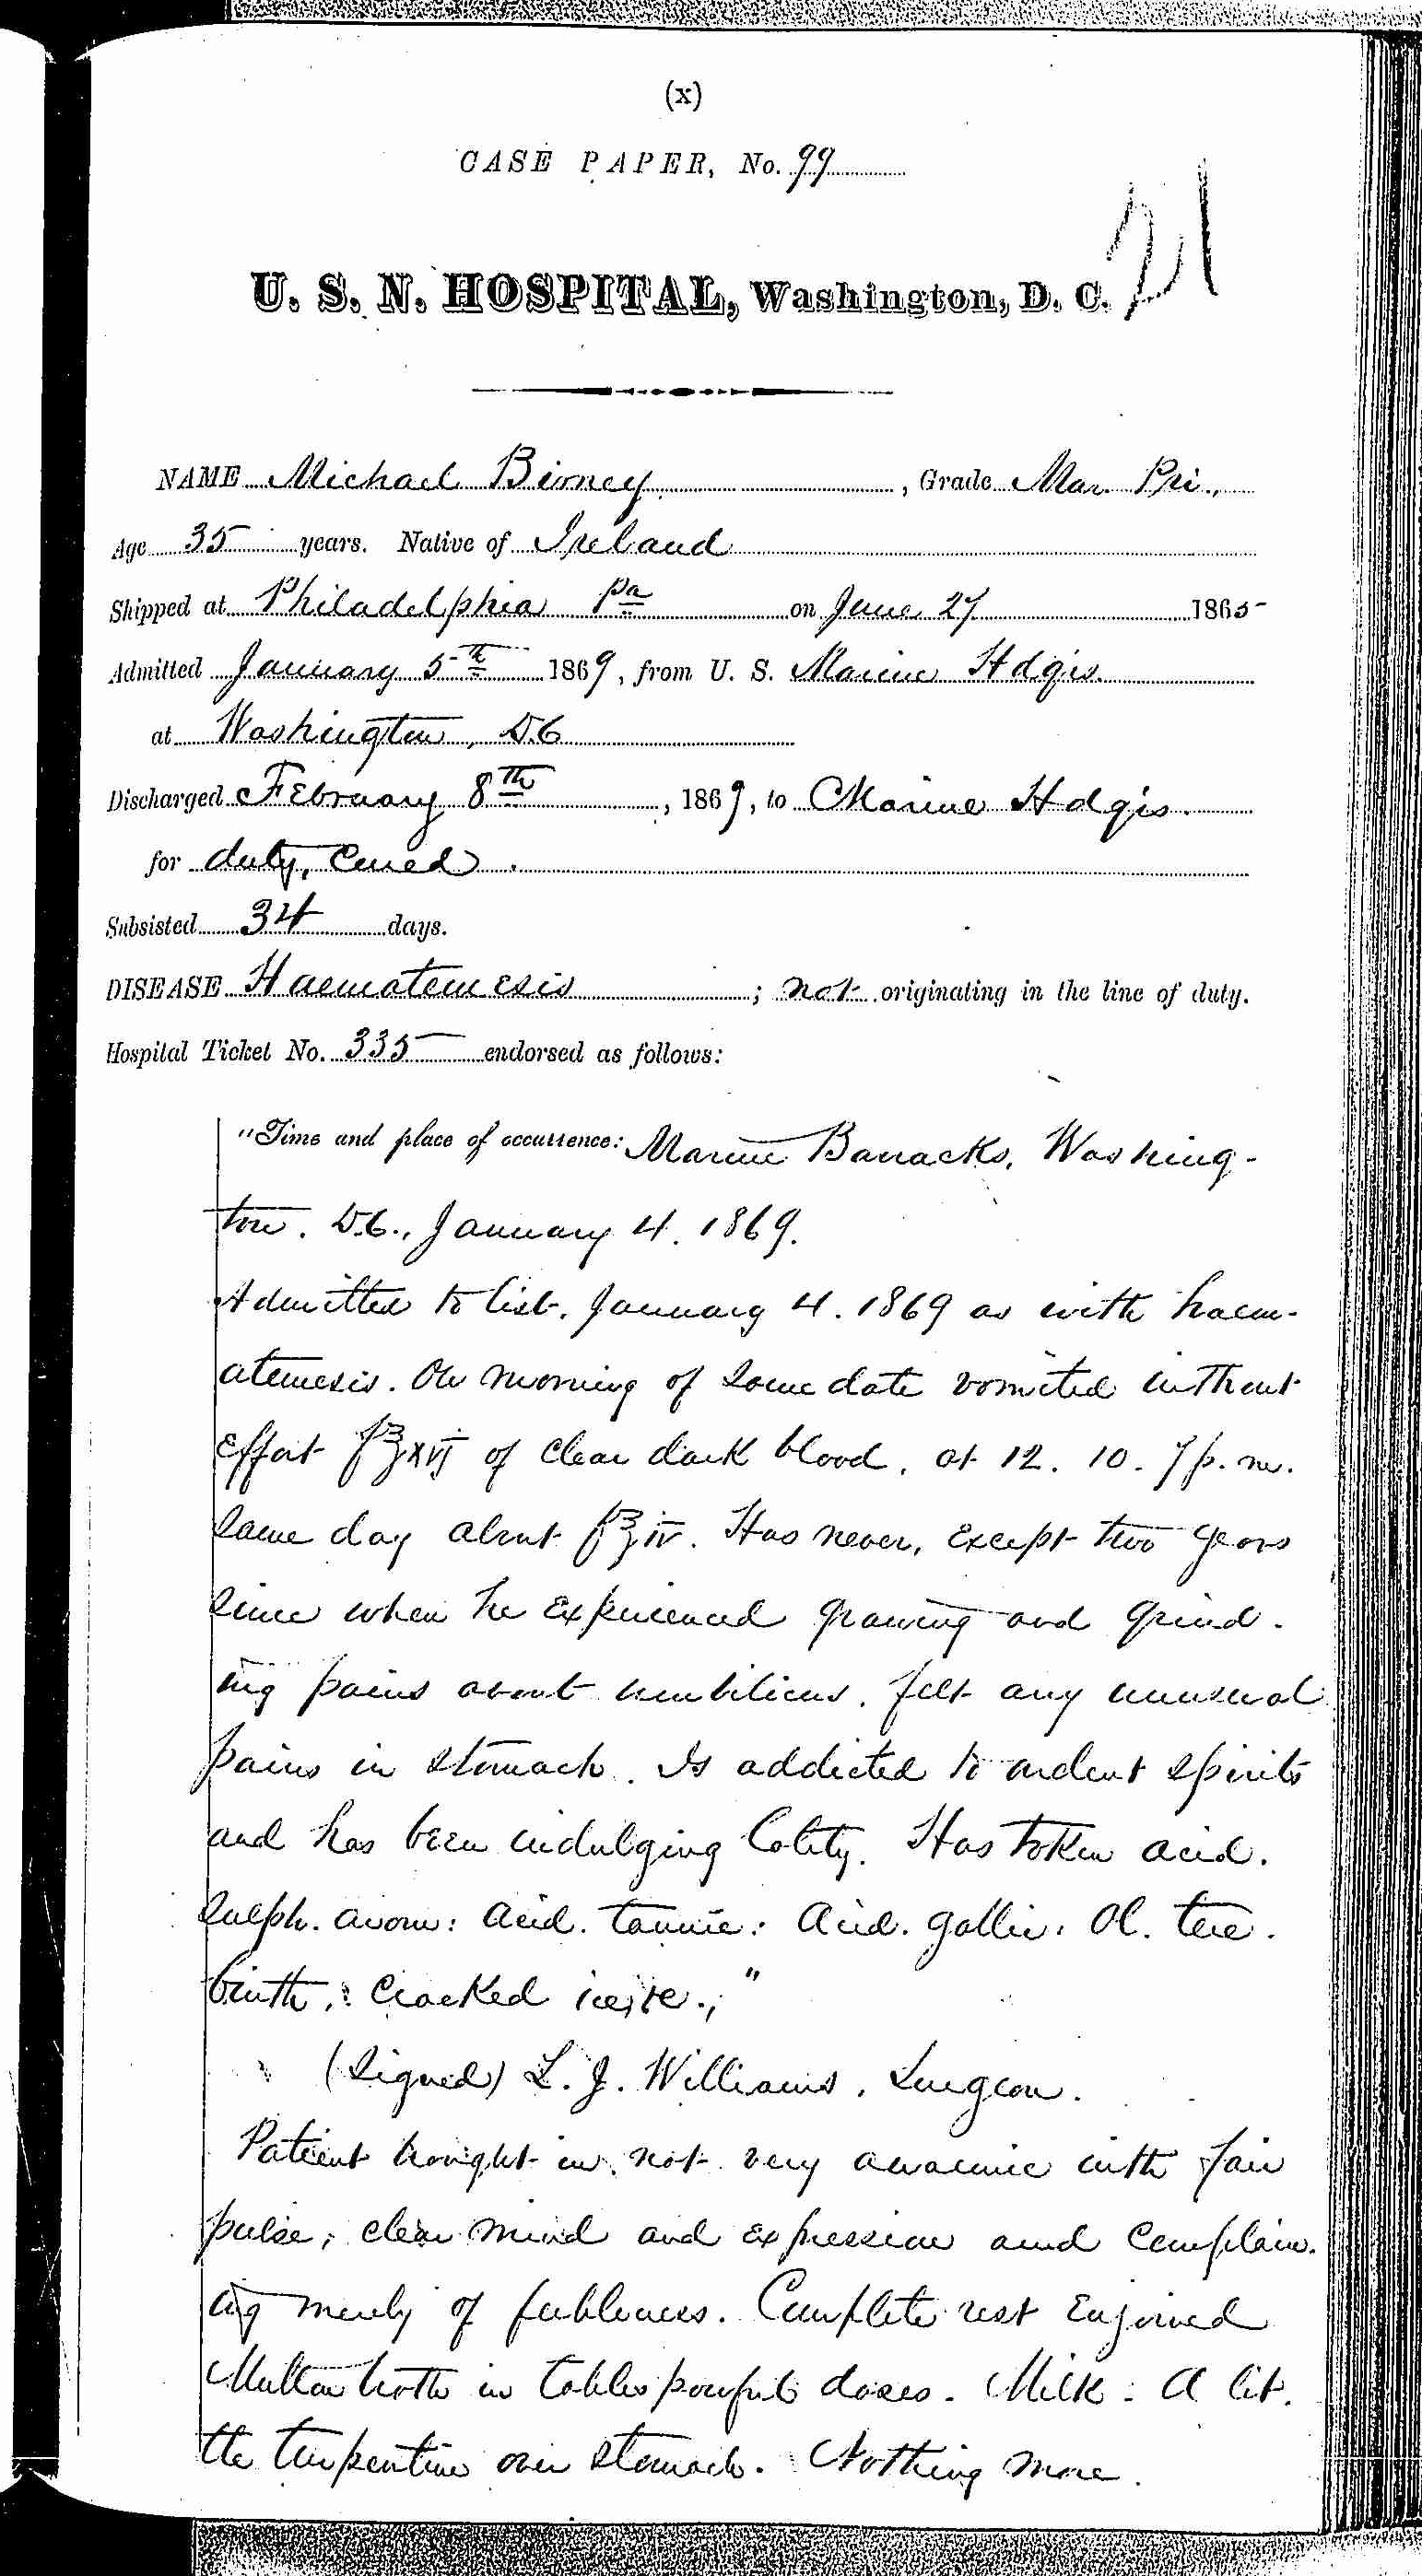 Entry for Michael Birney (page 1 of 3) in the log Hospital Tickets and Case Papers - Naval Hospital - Washington, D.C. - 1868-69